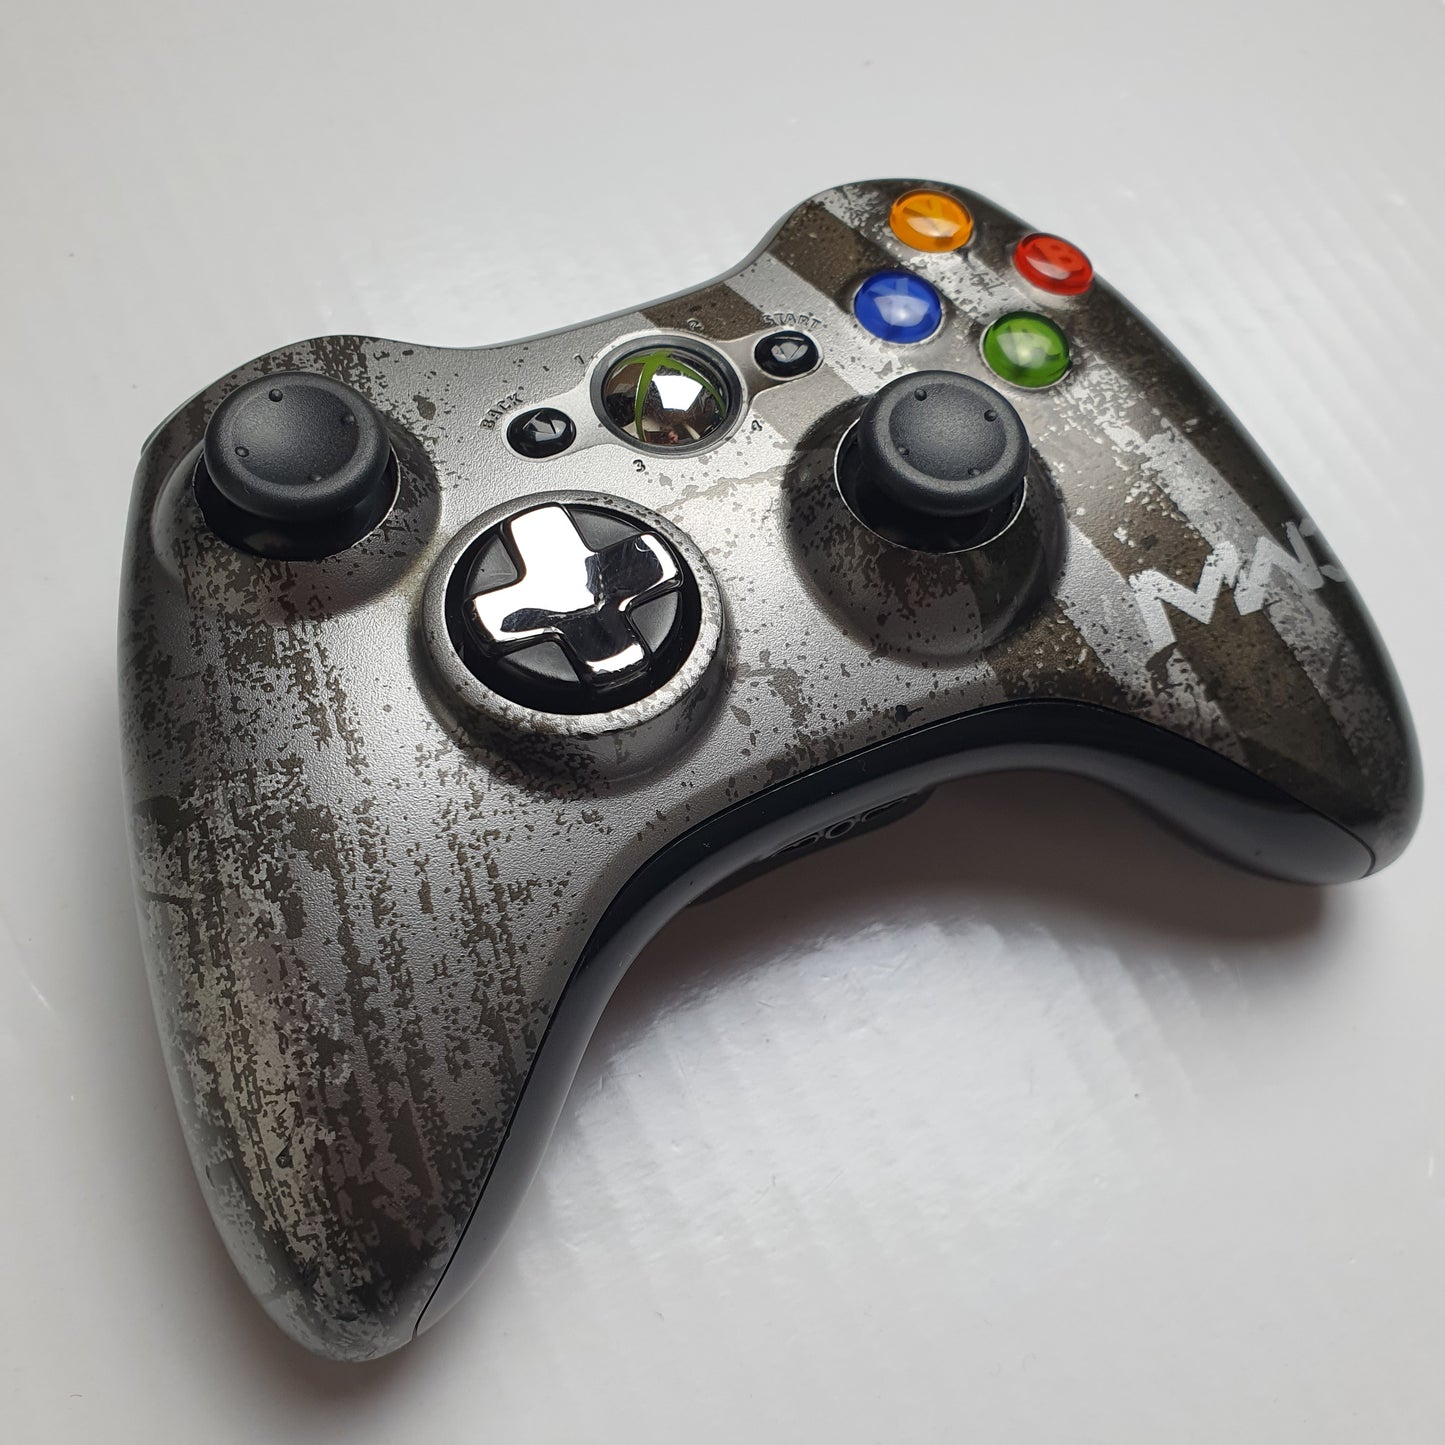 Official Microsoft Xbox 360 Limited Edition 'Modern Warfare 3' Wireless Controller